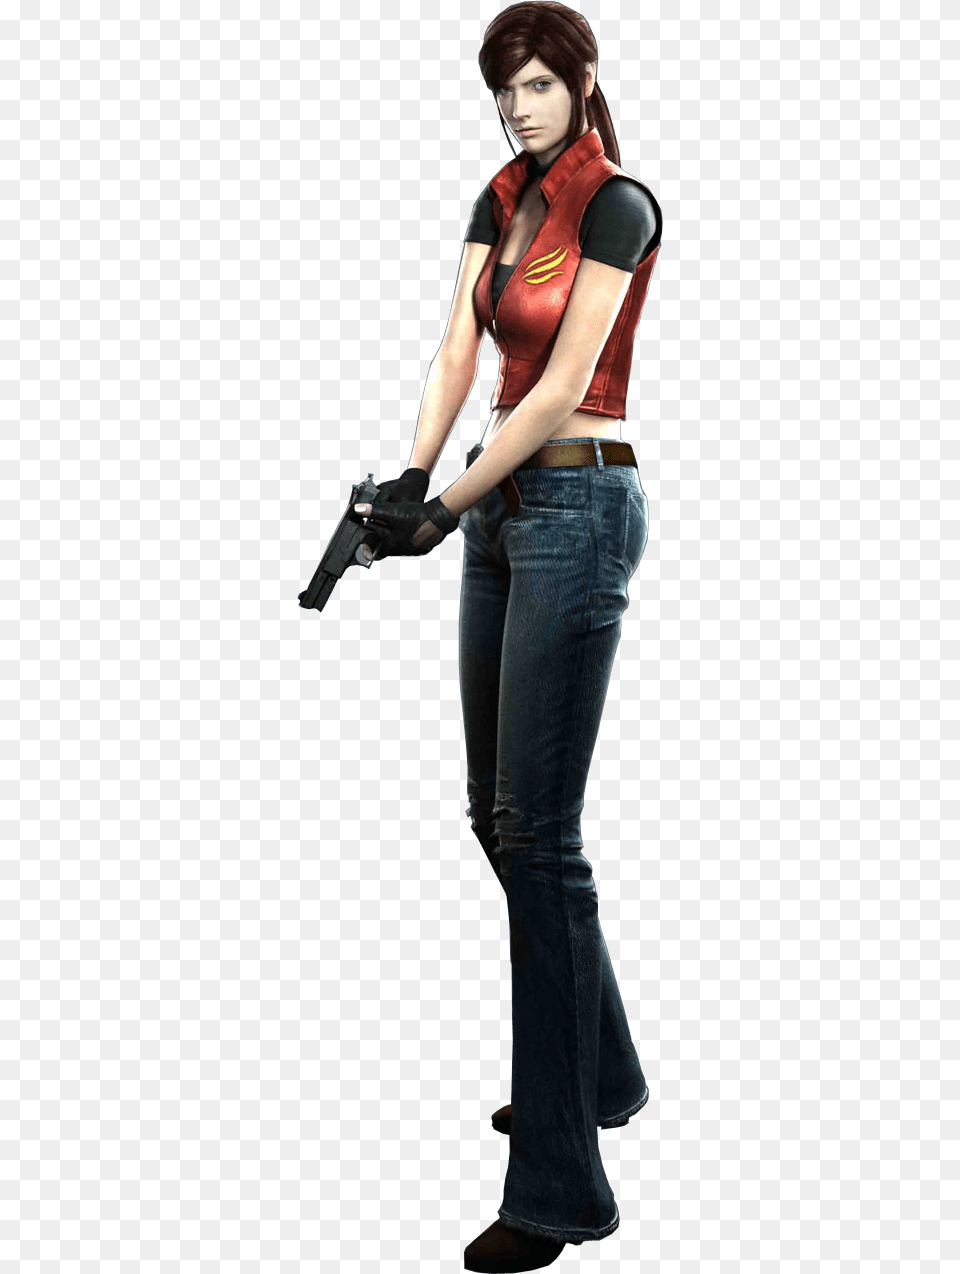 Resident Evil Code Veronica Claire Redfield Hd Claire Redfield Resident Evil Code Veronica, Handgun, Clothing, Costume, Weapon Free Png